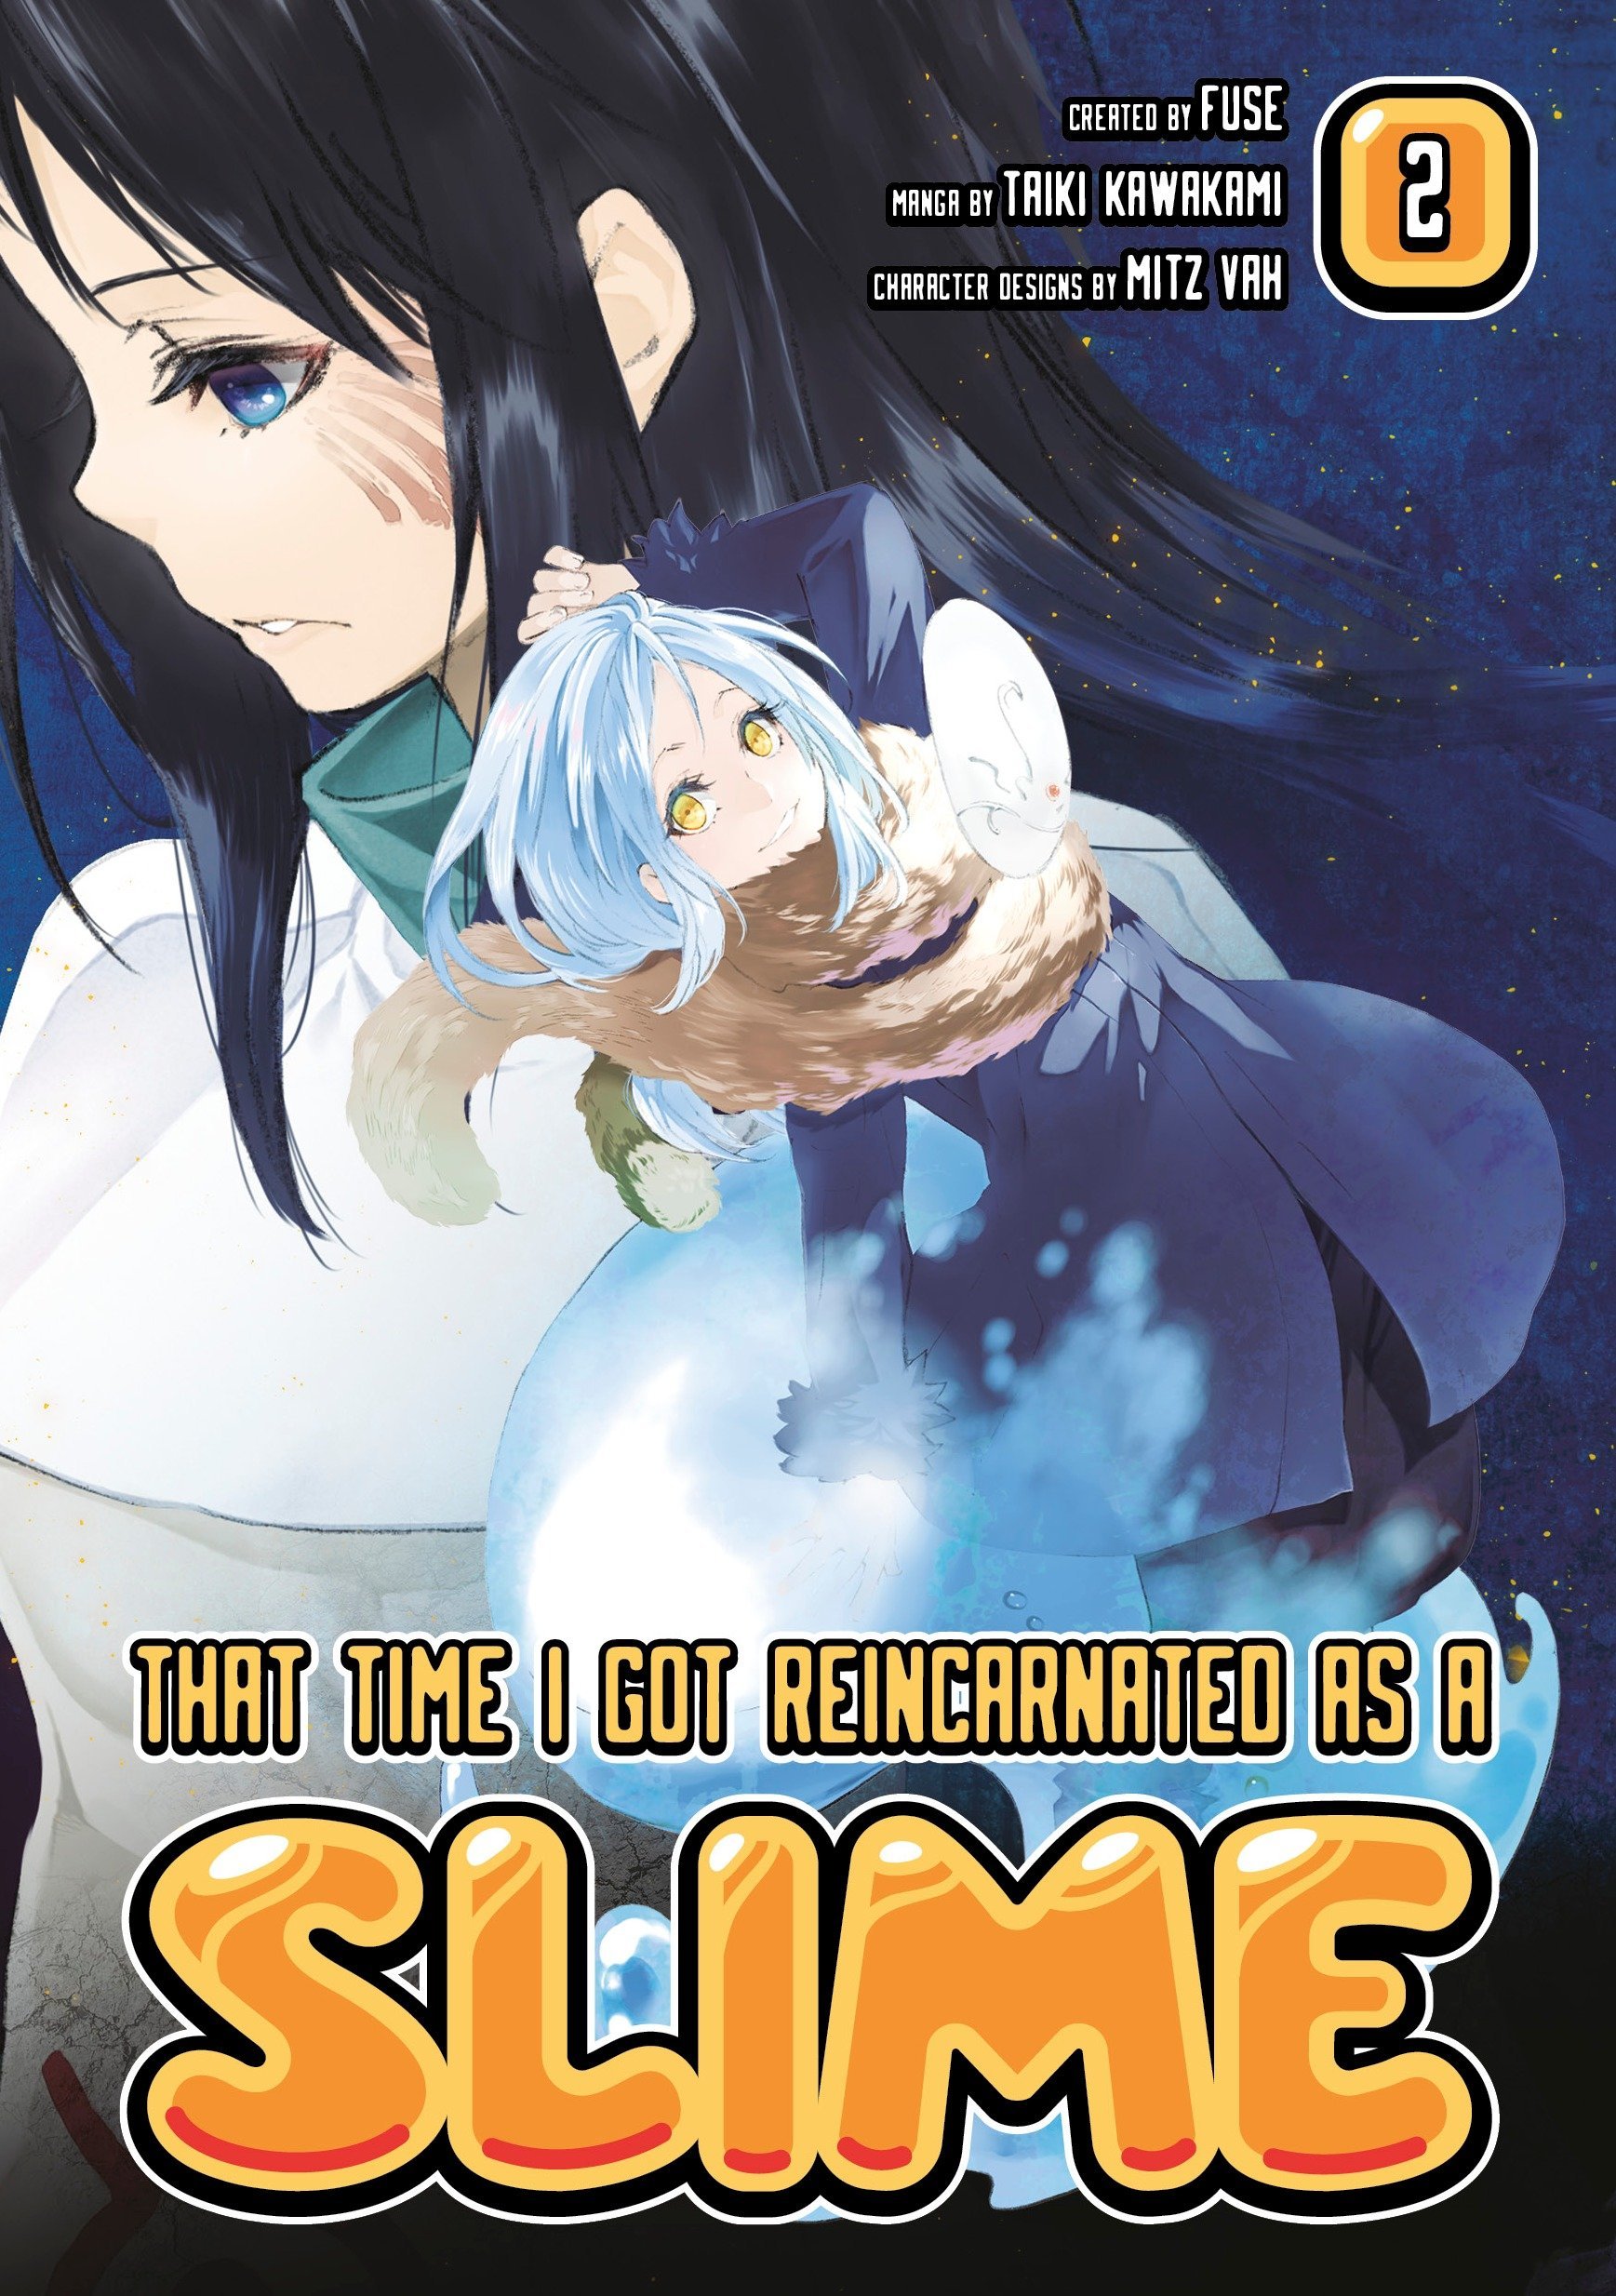 That Time I Got Reincarnated as a Slime - Volume 2 | Fuse